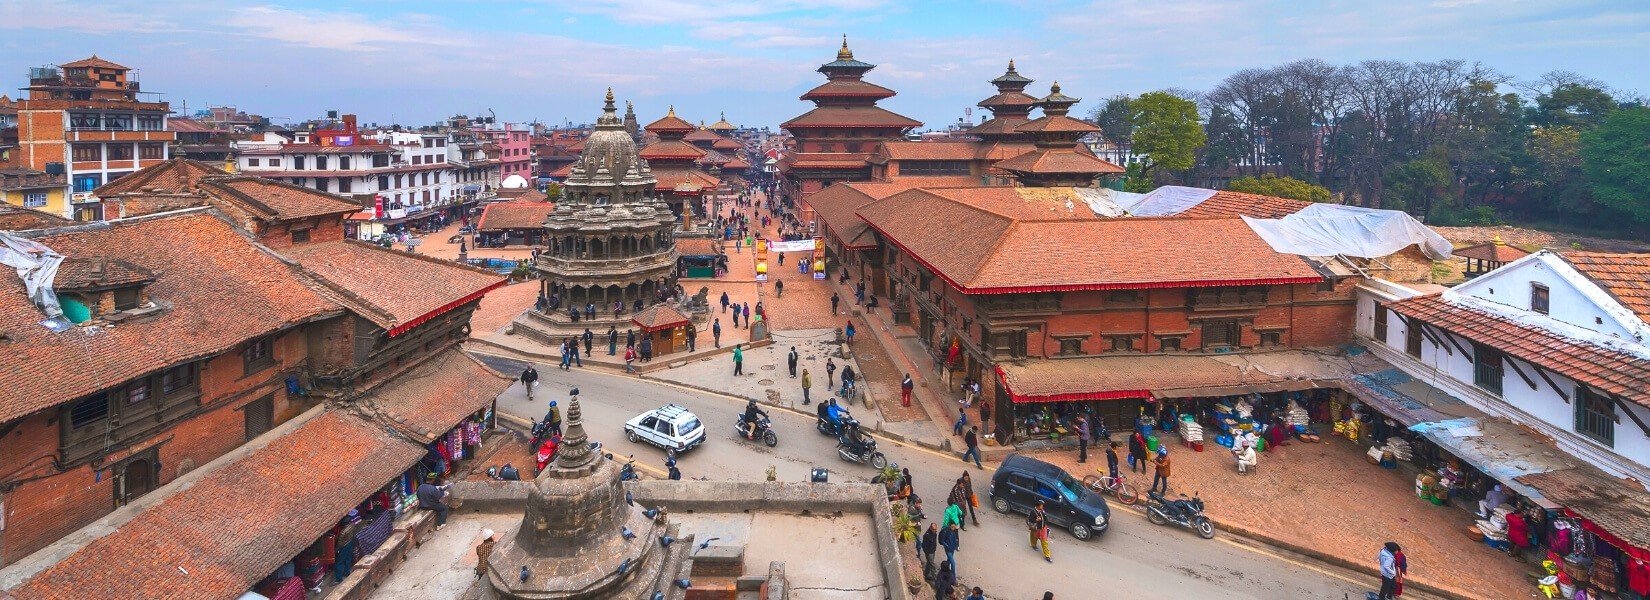 Entry Fees To Heritage Sites In Nepal